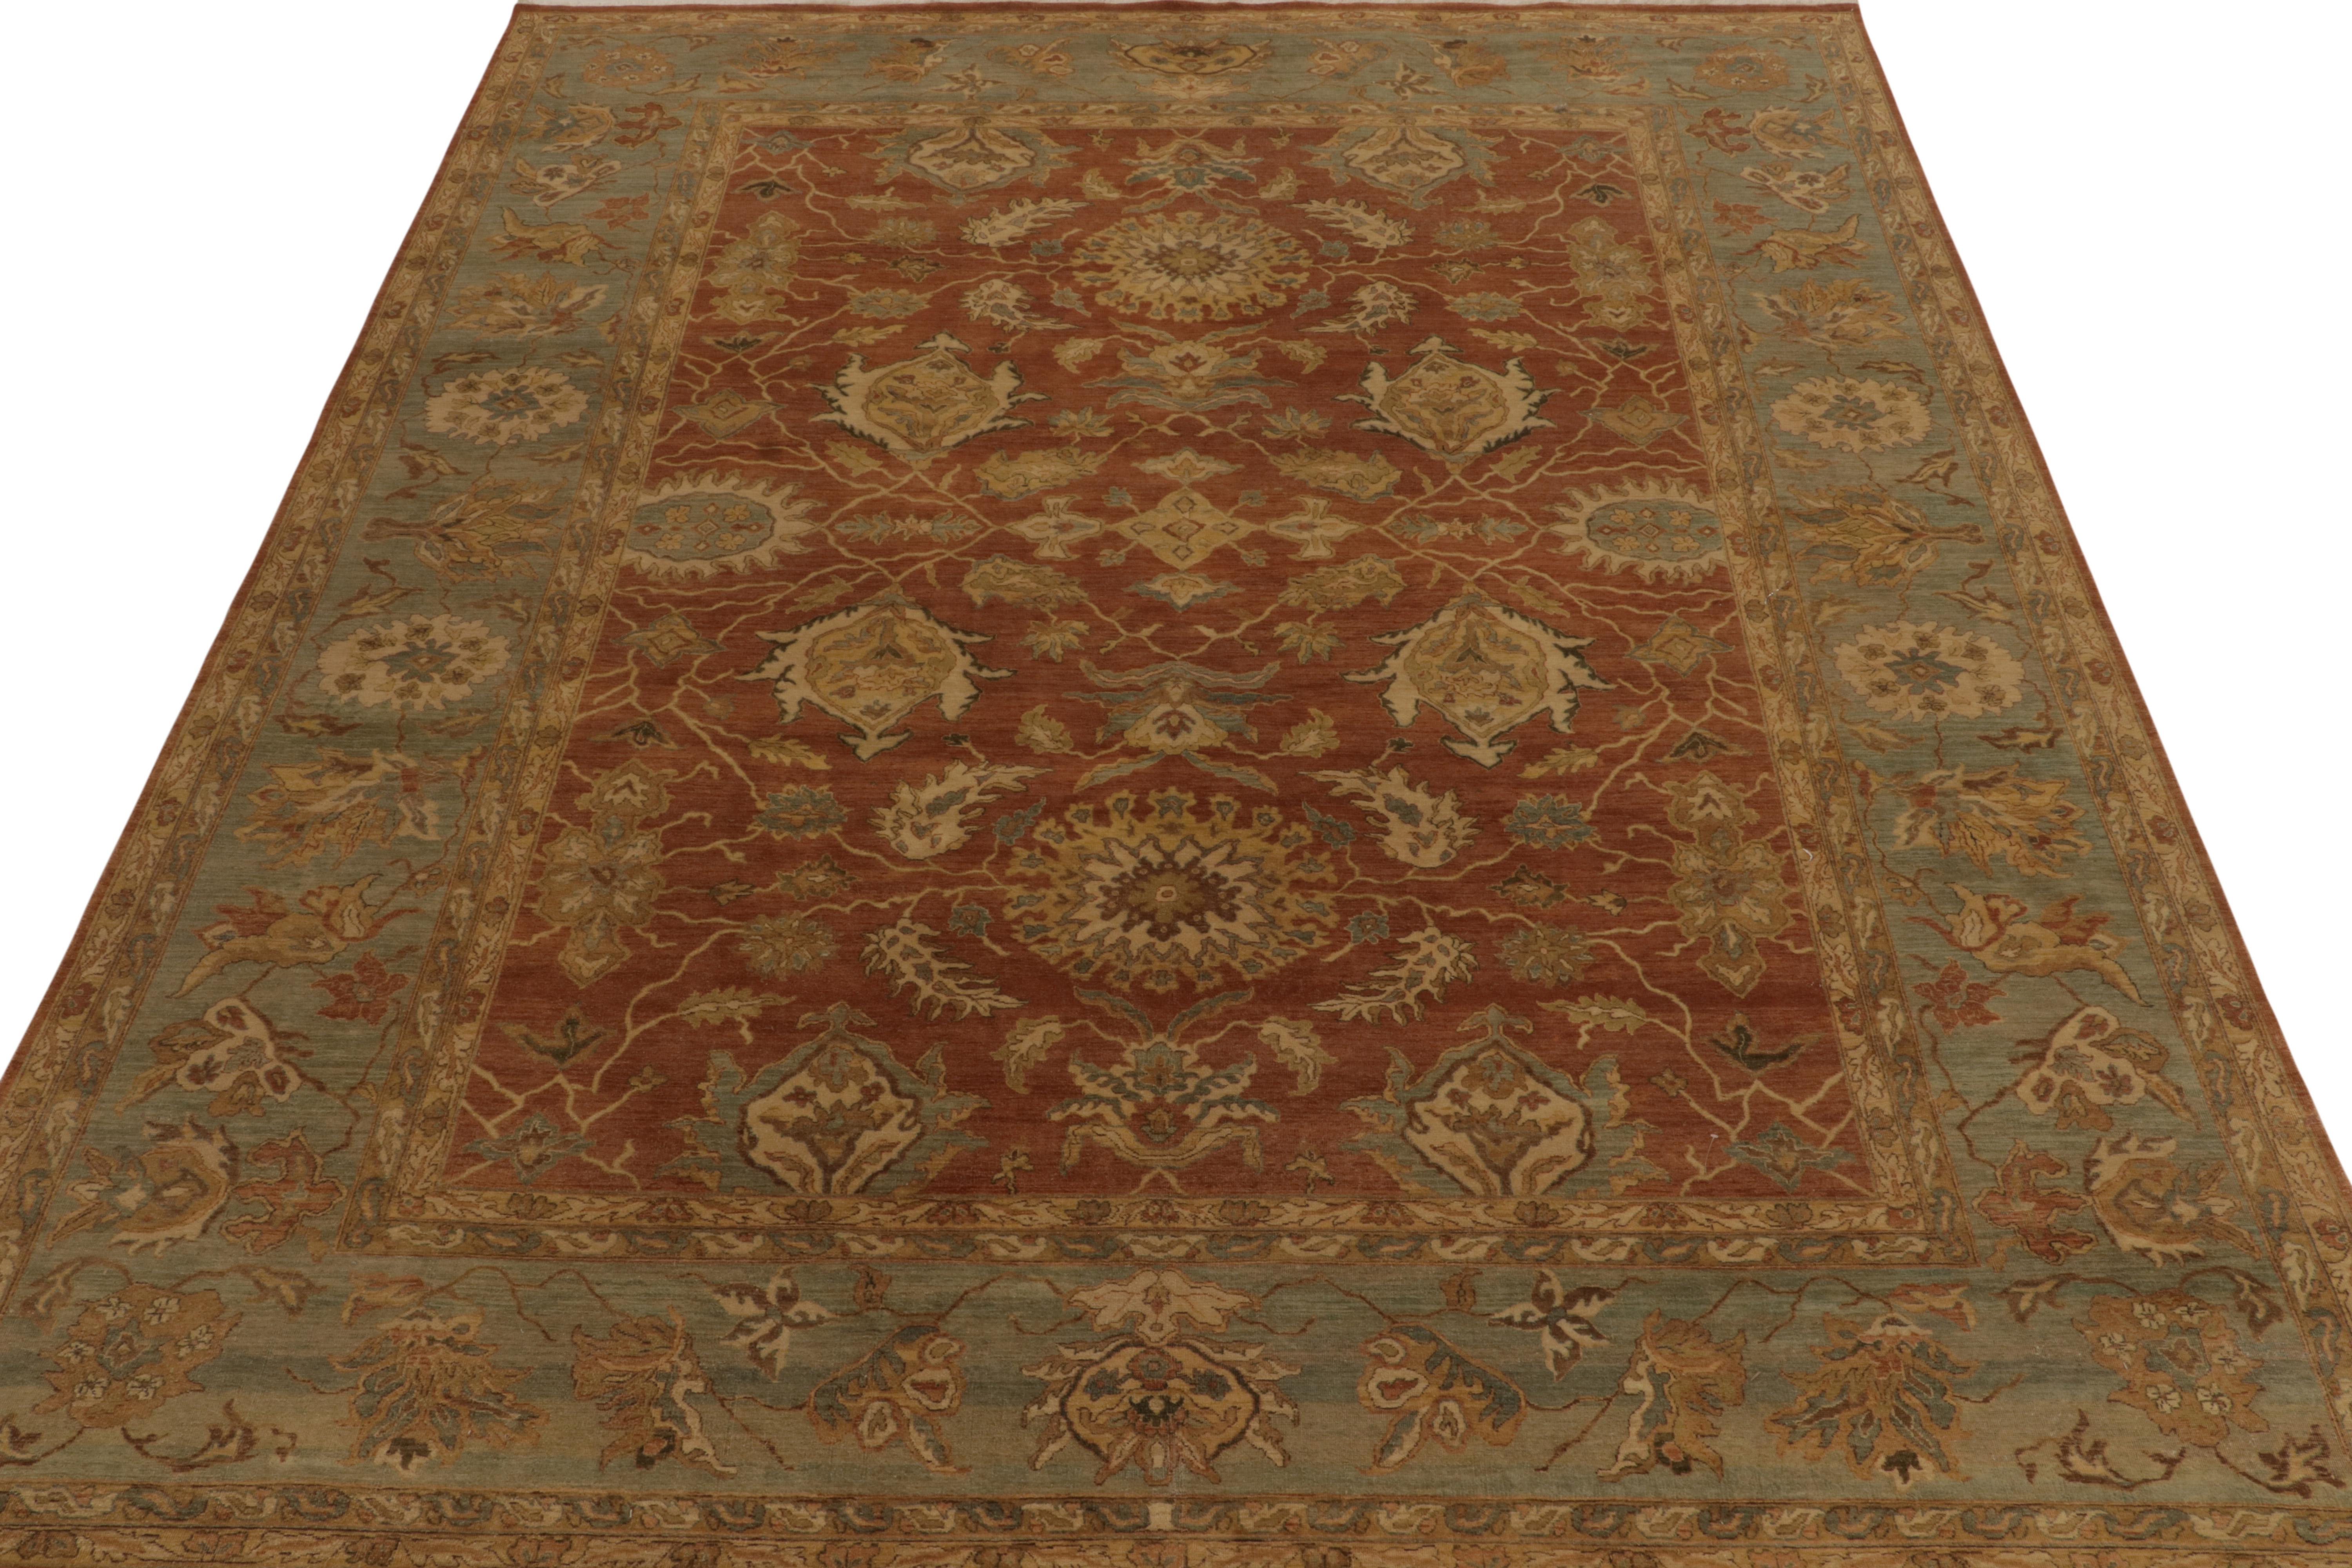 Indian Rug & Kilim's Classic Tabriz Style Rug with Beige & Blue Florals on Rust Red For Sale